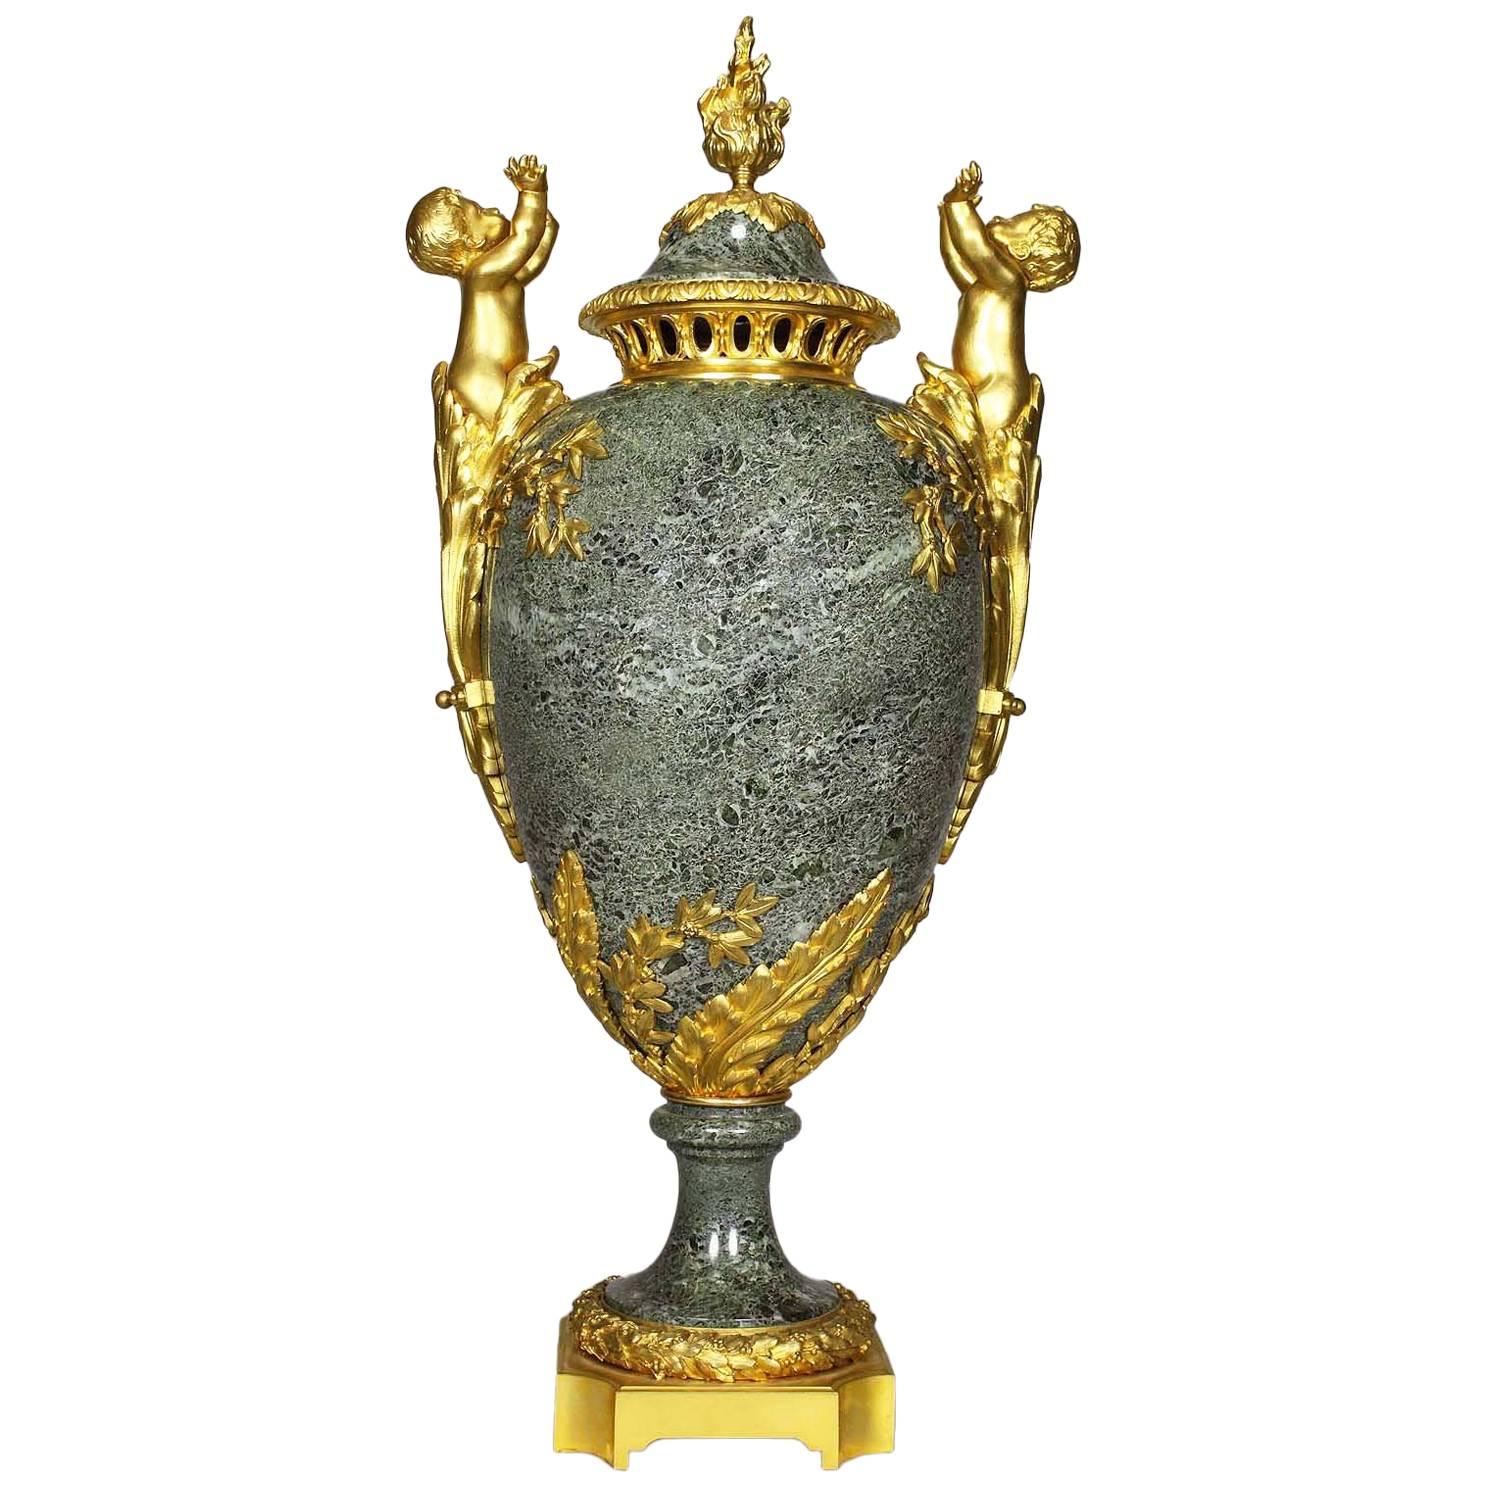 French 19th-20th Century Louis XVI Style Gilt-Bronze & Marble Urn with Children For Sale